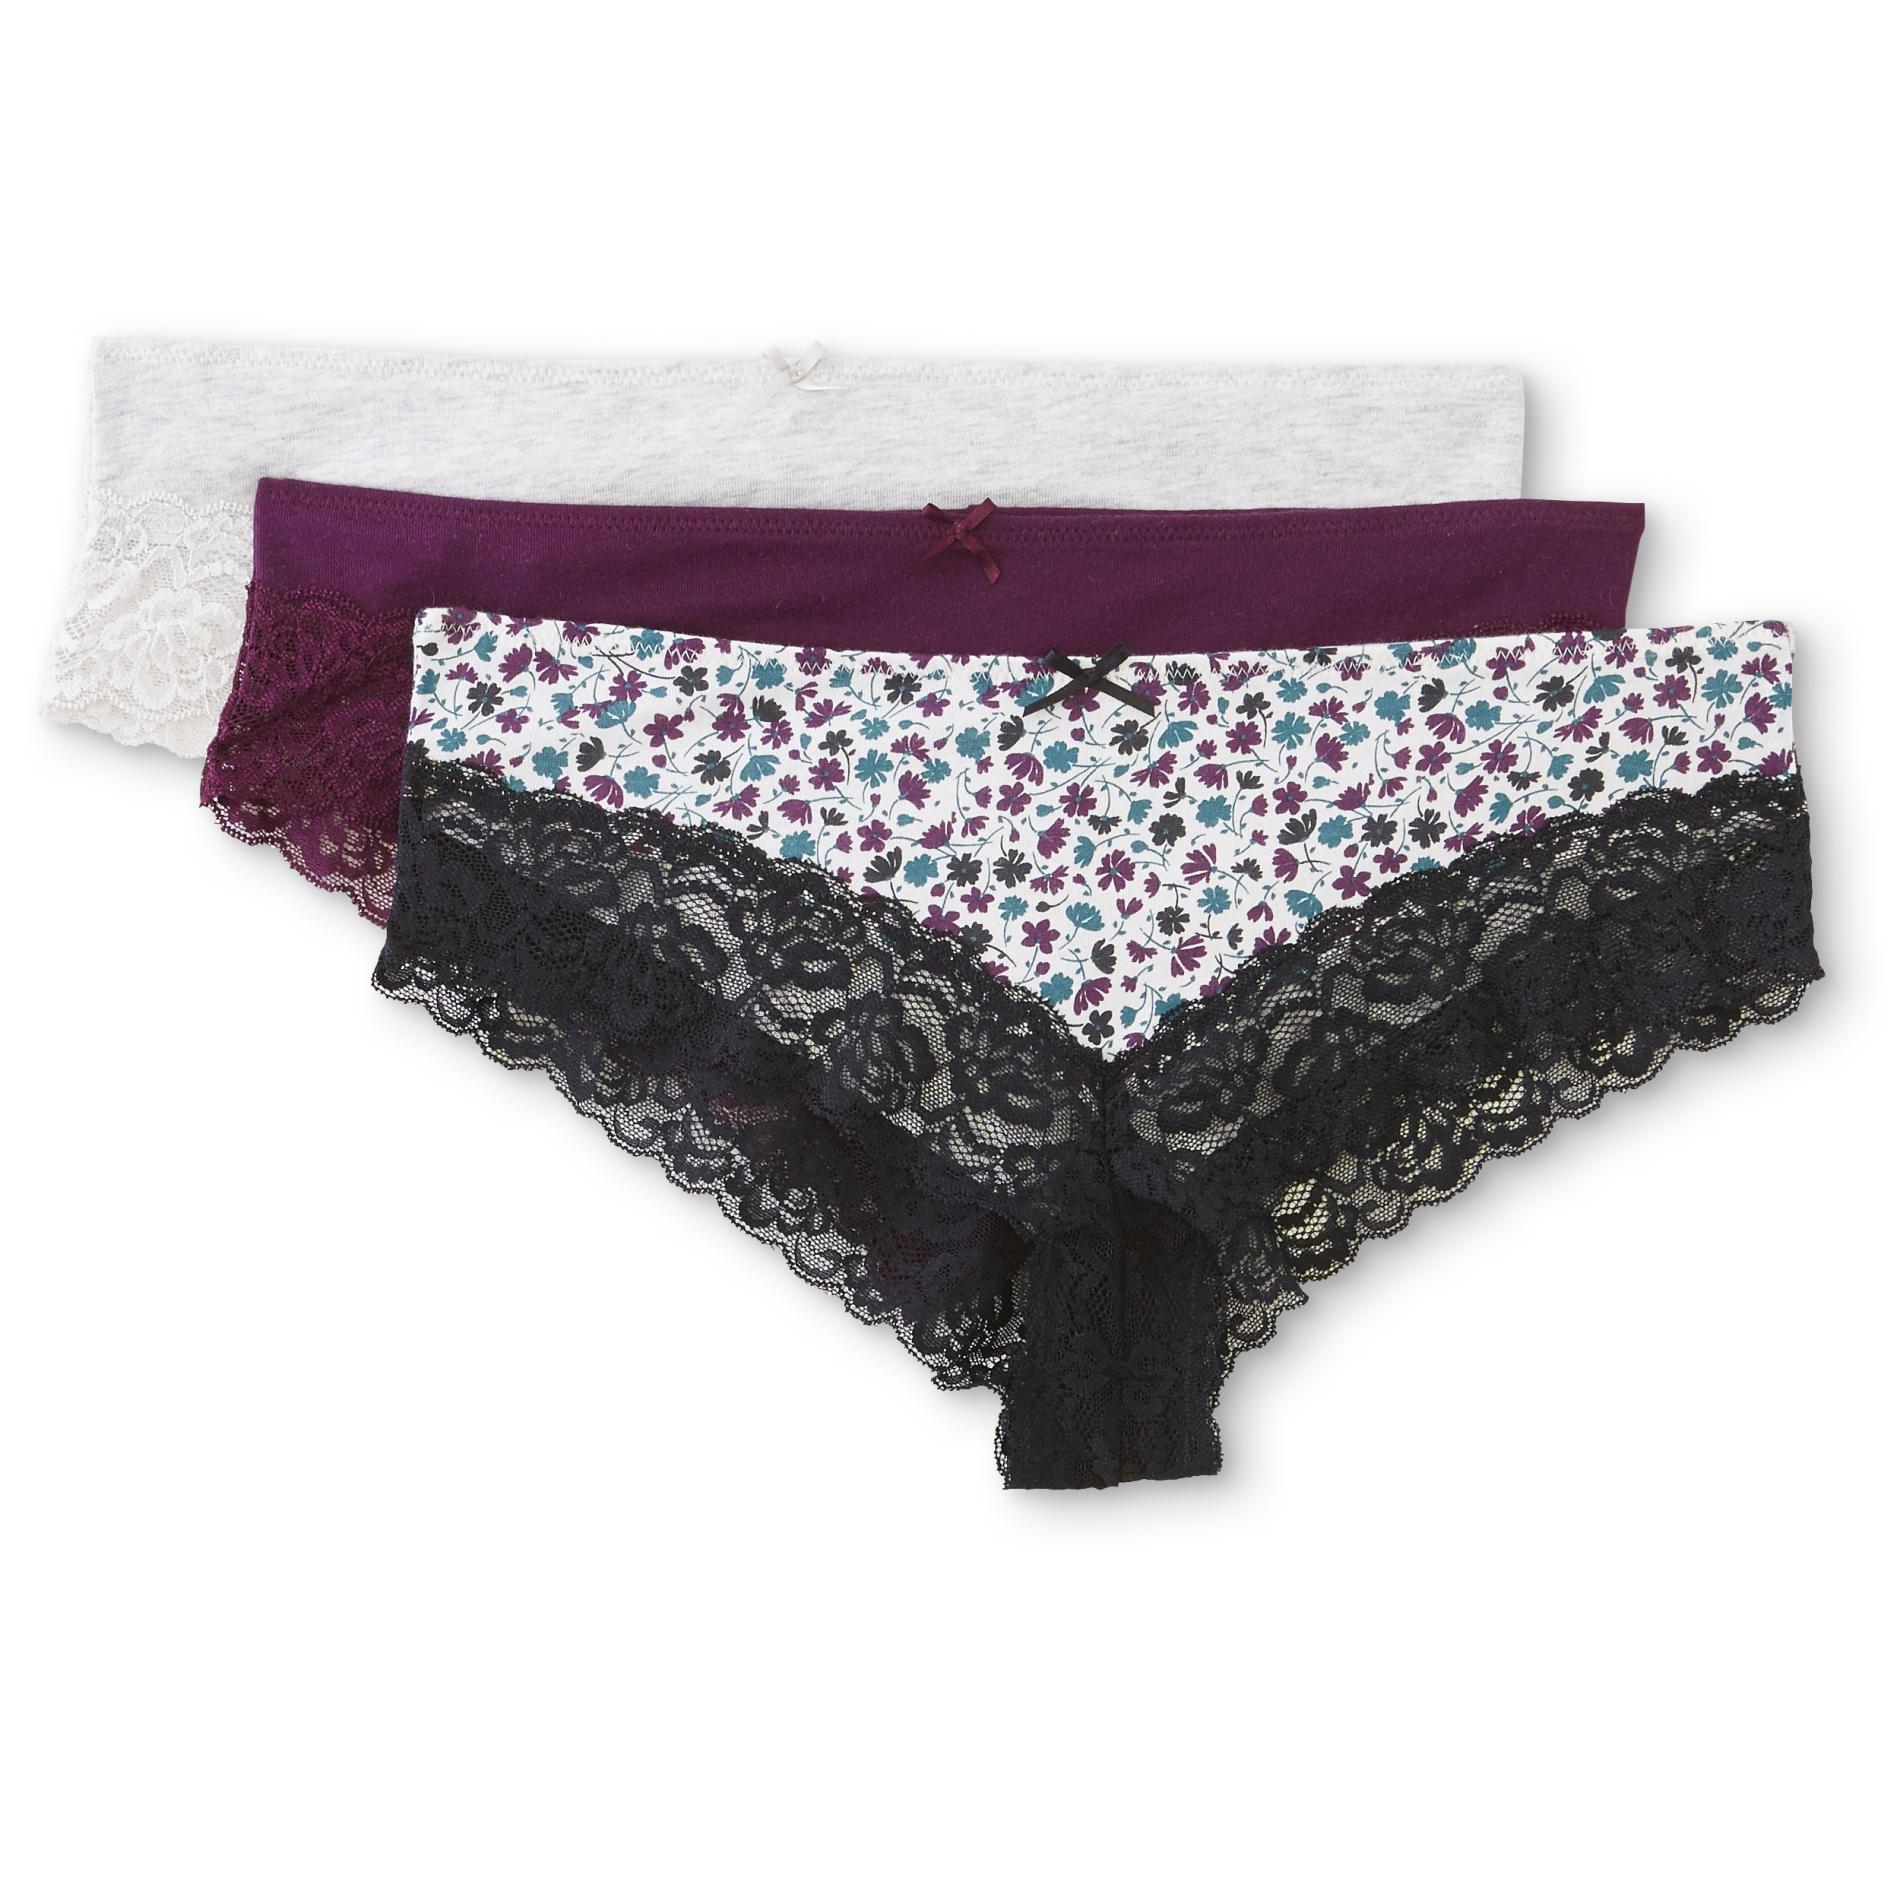 Simply Styled Women's 3-Pack Cheeky Panties - Floral